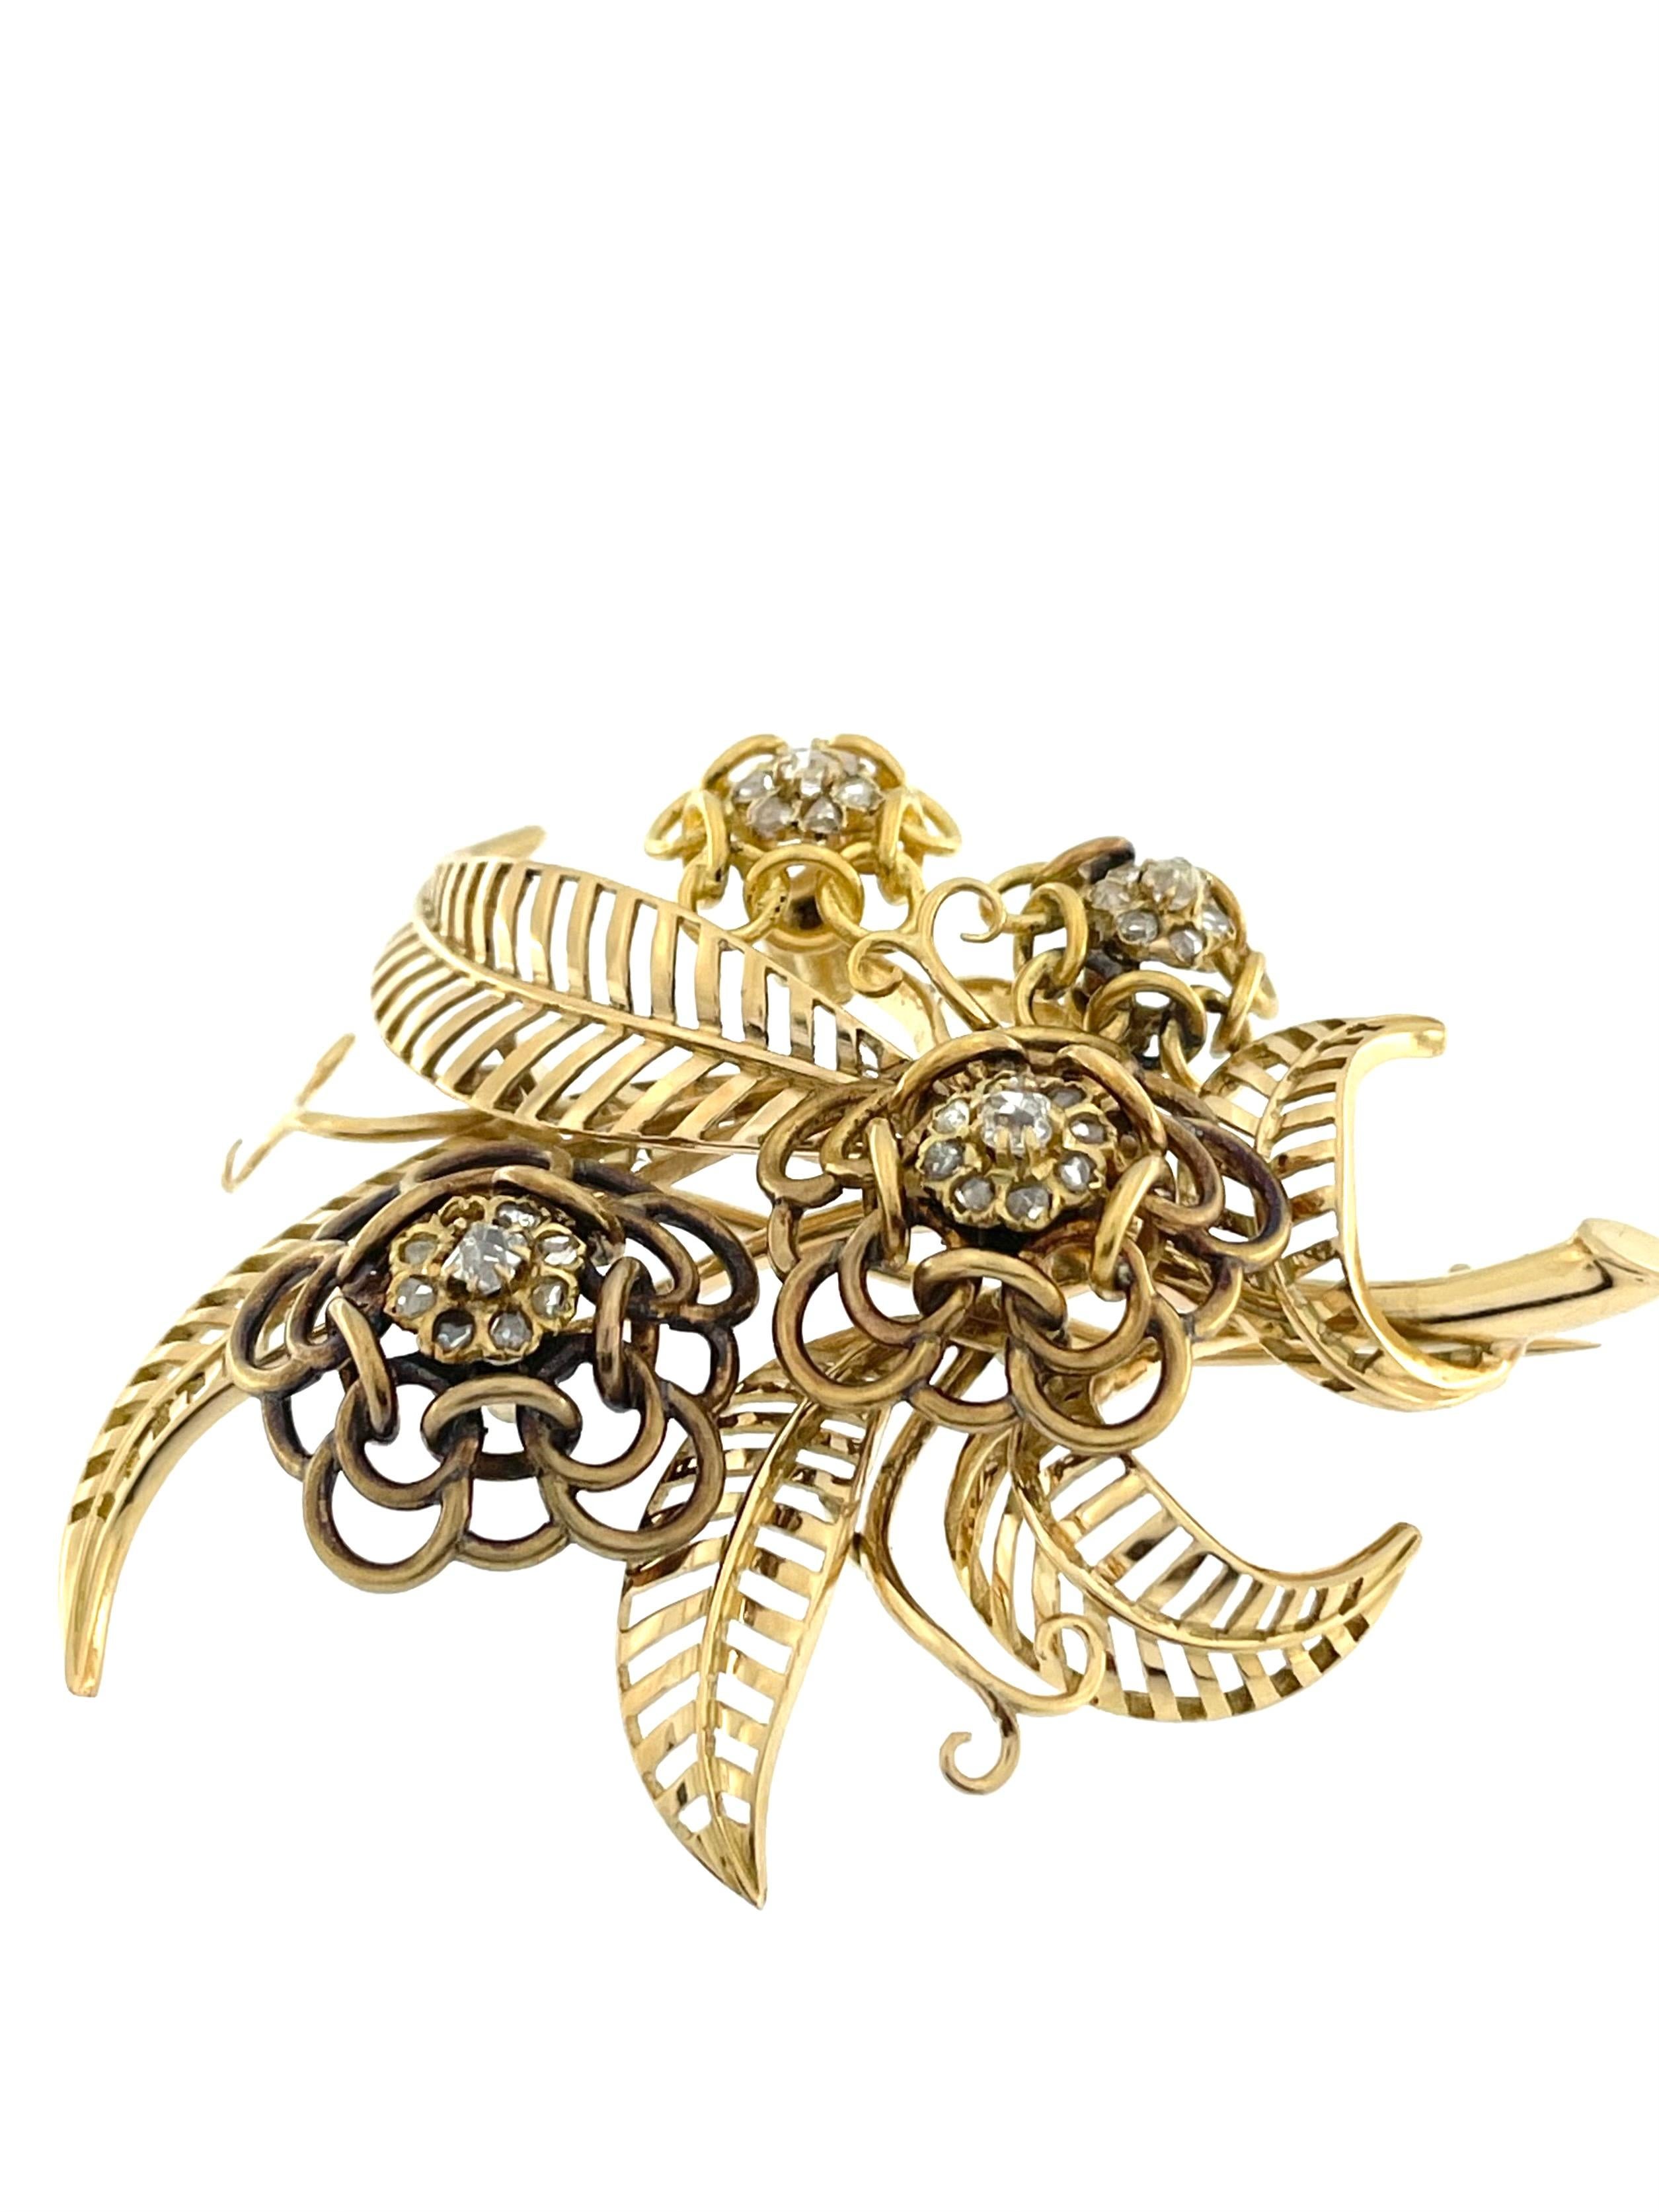 The Mid Century Brooch described is an exquisite piece of jewelry crafted from 18-karat yellow gold, showcasing a timeless and elegant design characteristic of the mid-20th century aesthetic. The use of 18-karat gold indicates a high level of purity